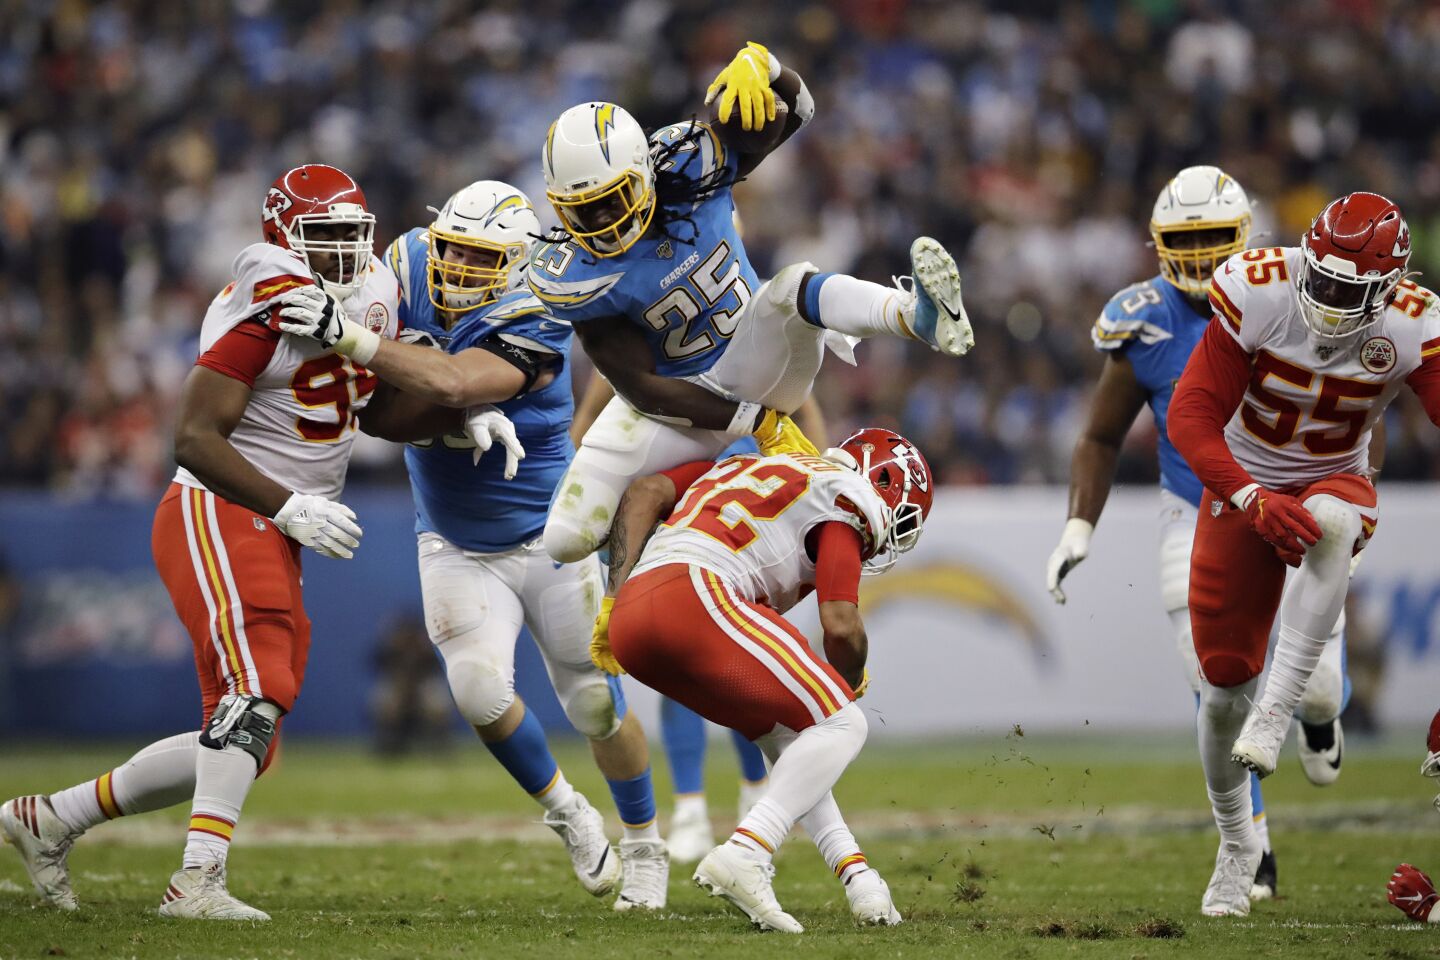 Chargers running back Melvin Gordon leaps over Chiefs strong safety Tyrann Mathieu during the first half of a game Nov. 18 at Estadio Azteca in Mexico City.